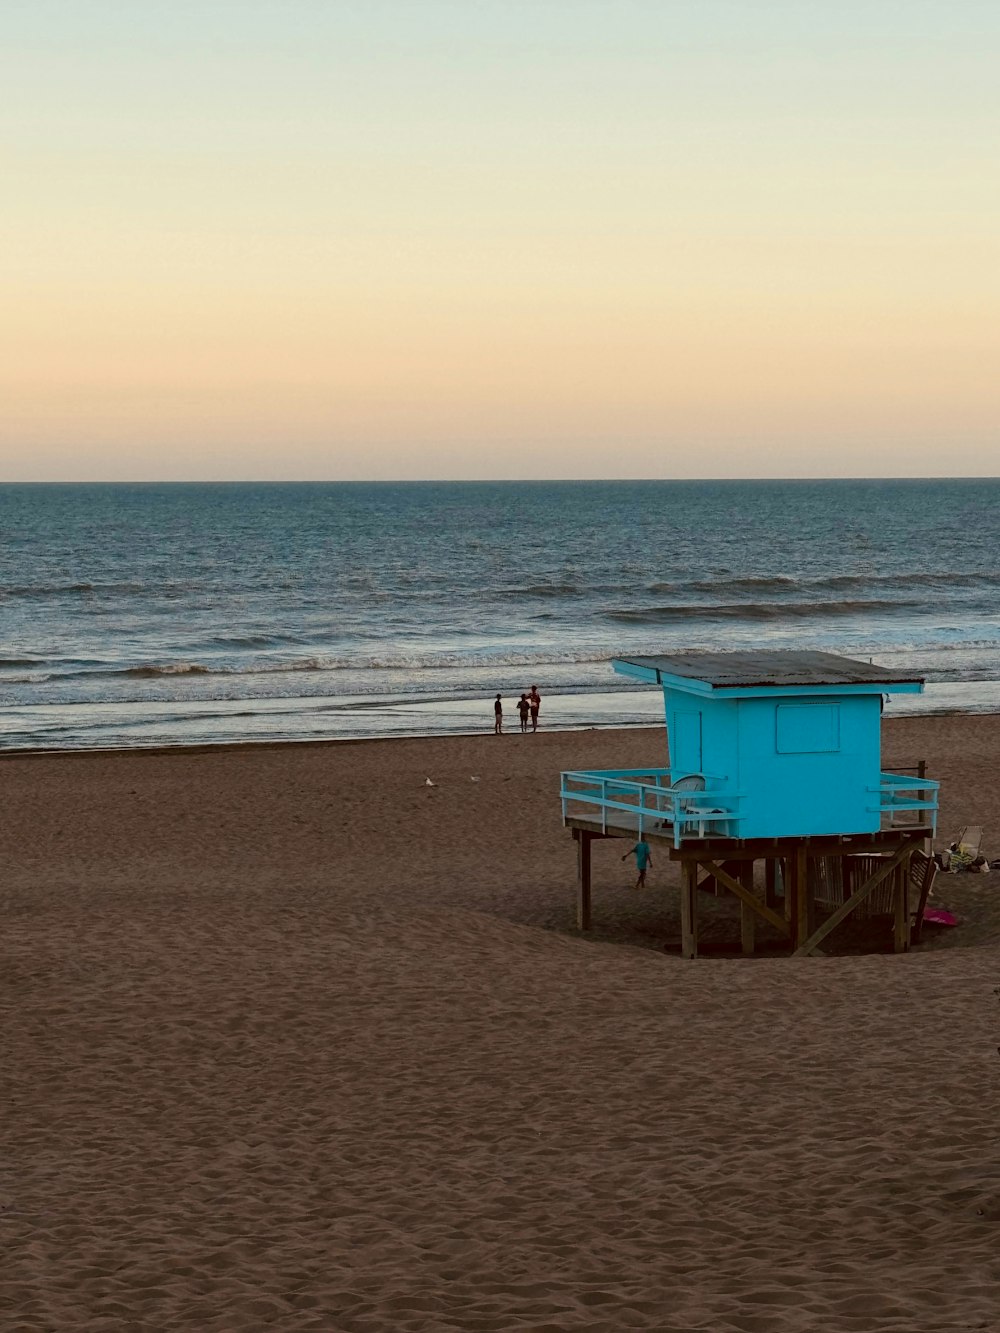 a lifeguard tower on a beach with people in the background